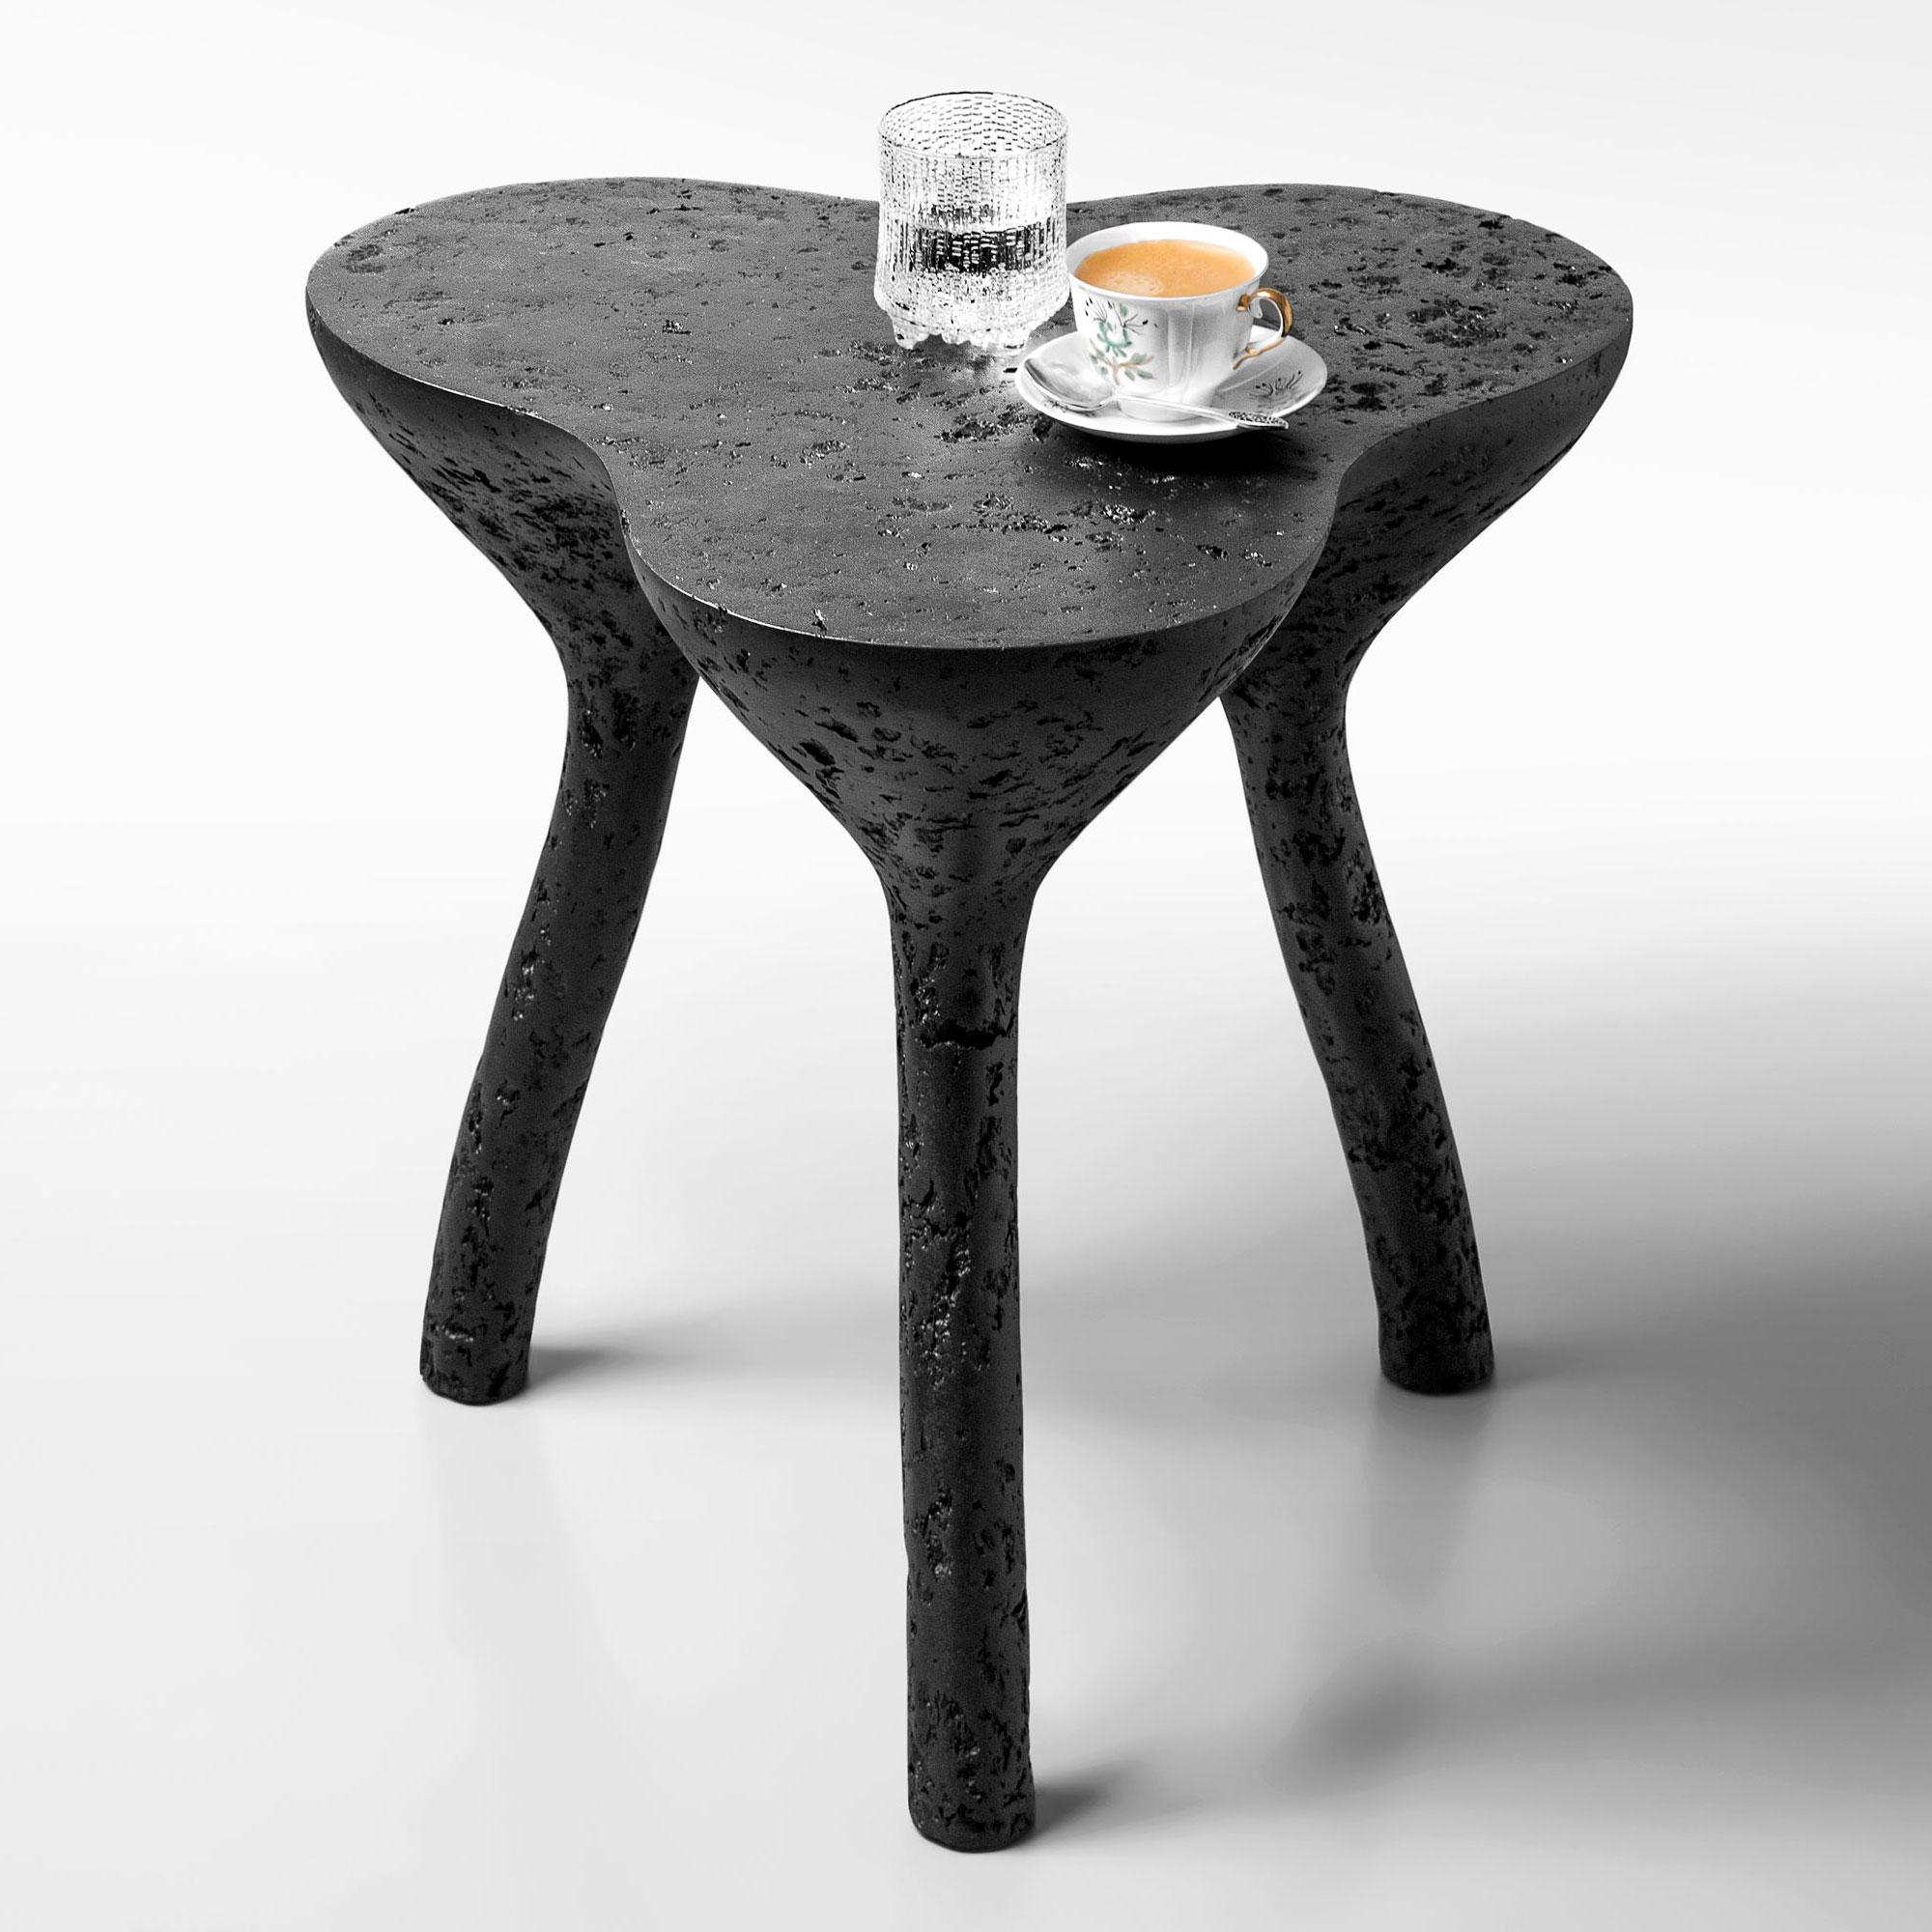 Black Matte Tripod Coffee Table, Accent Table by Donatas Žukauskas In New Condition For Sale In Rudamina, LT